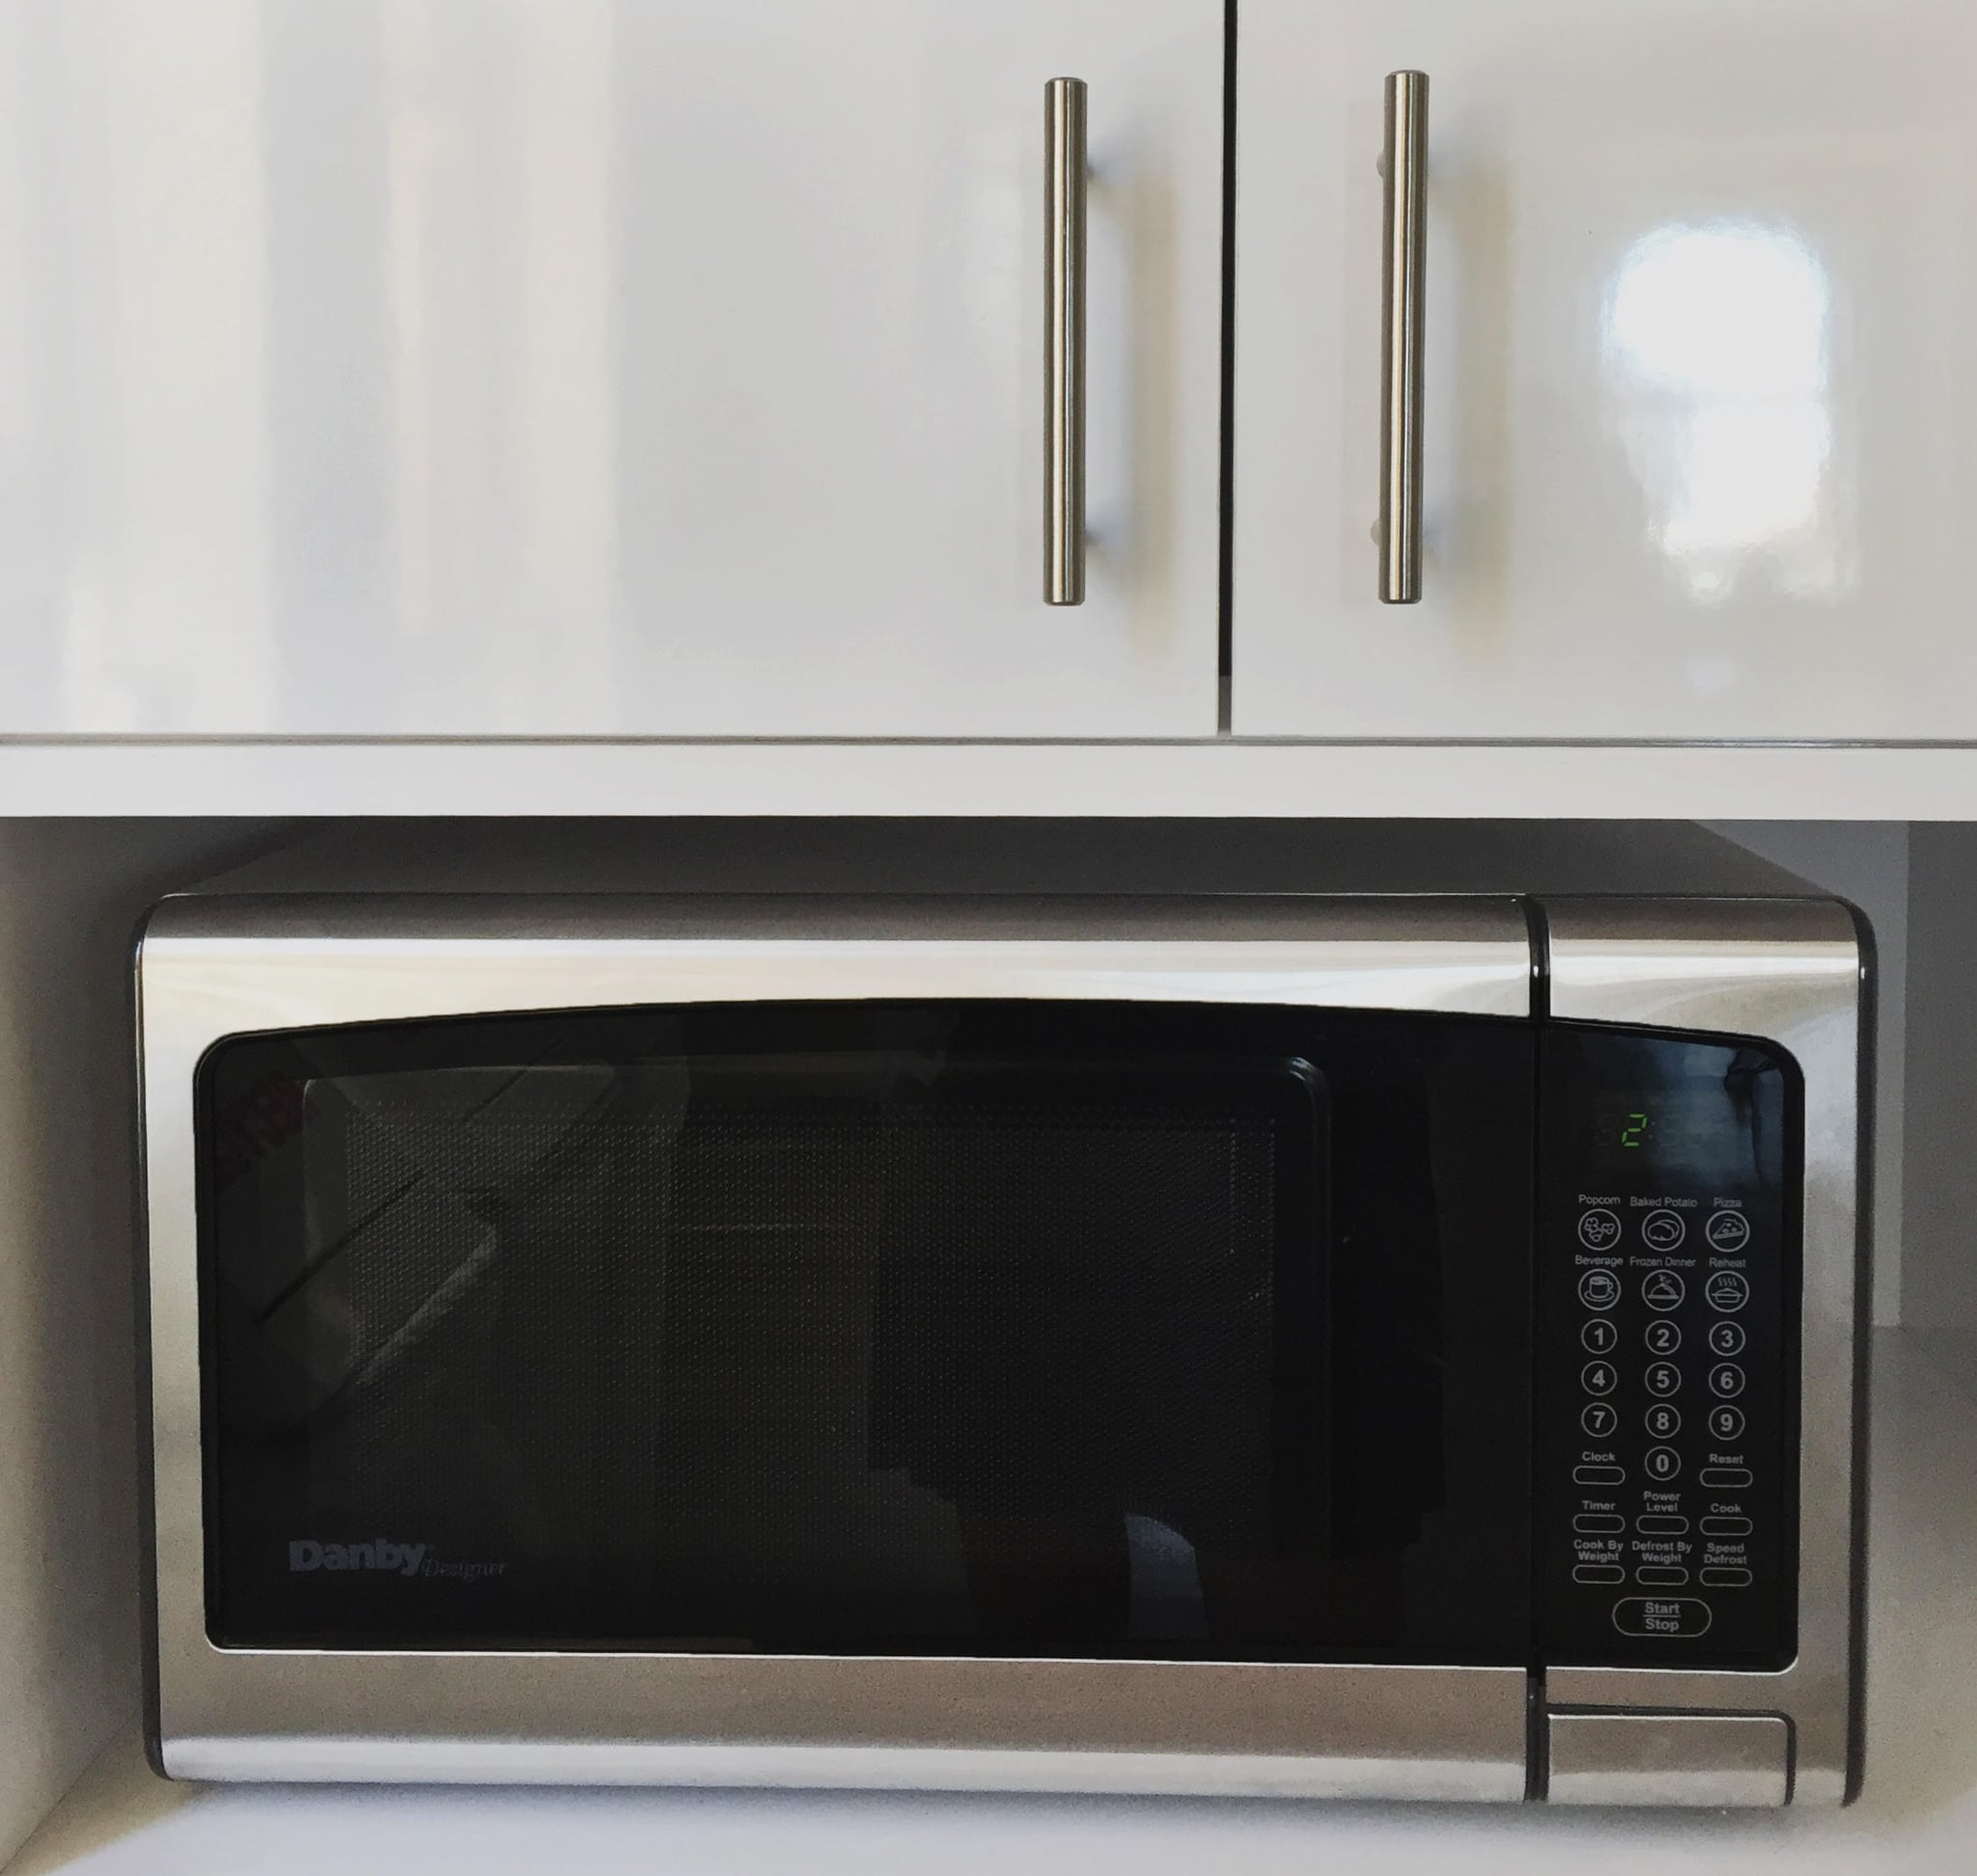 PopsugarLivingBudget TipsHow to Clean a Microwave With VinegarThe Easiest Way to Clean Your MicrowaveApril 19, 2018 by Emily Co3.3K SharesChat with us on Facebook Messenger. Learn what's trending across POPSUGAR.If you haven't cleaned your microwave in a while, then you might notice a buildup of gunk. And if it's been sitting in there for a while, then the bits of food may have hardened to the point of making it almost impossible to remove. Thankfully, steam-cleaning the inside of the appliance with a vinegar-water solution will remedy the mess without much effort. Here's what you need to do.Related:This Homemade Drain Cleaner Will Banish Clogs For GoodFirst, gather your materials:Microwave-safe bowlToothpick or stir stickVinegarWaterSpongeInstructions:Pour equal parts vinegar and water into the bowl. Measure based on how long you plan to steam your microwave for. Using half a cup of each liquid is good enough, but if it's in need of a deeper clean, then use one cup vinegar and one cup water.Insert a toothpic - 웹